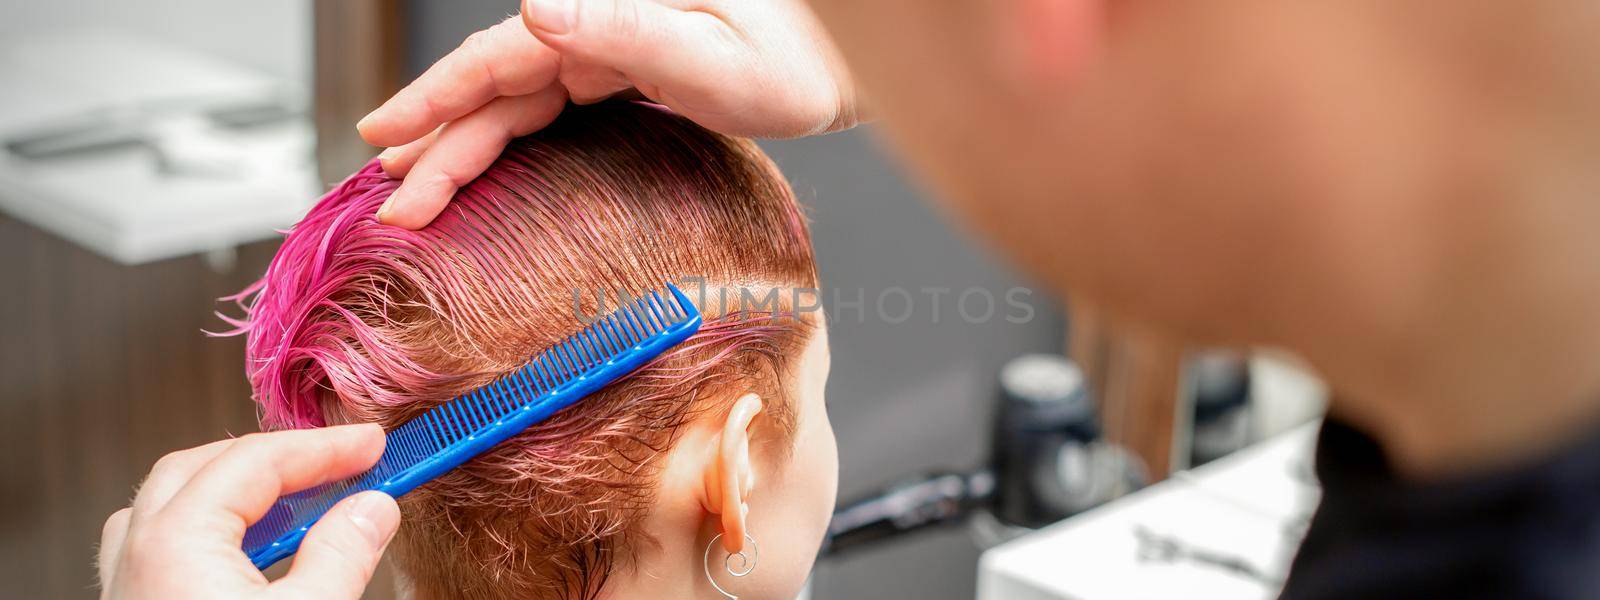 Combing the hair of a young woman during coloring hair in pink color at a hair salon close up. by okskukuruza